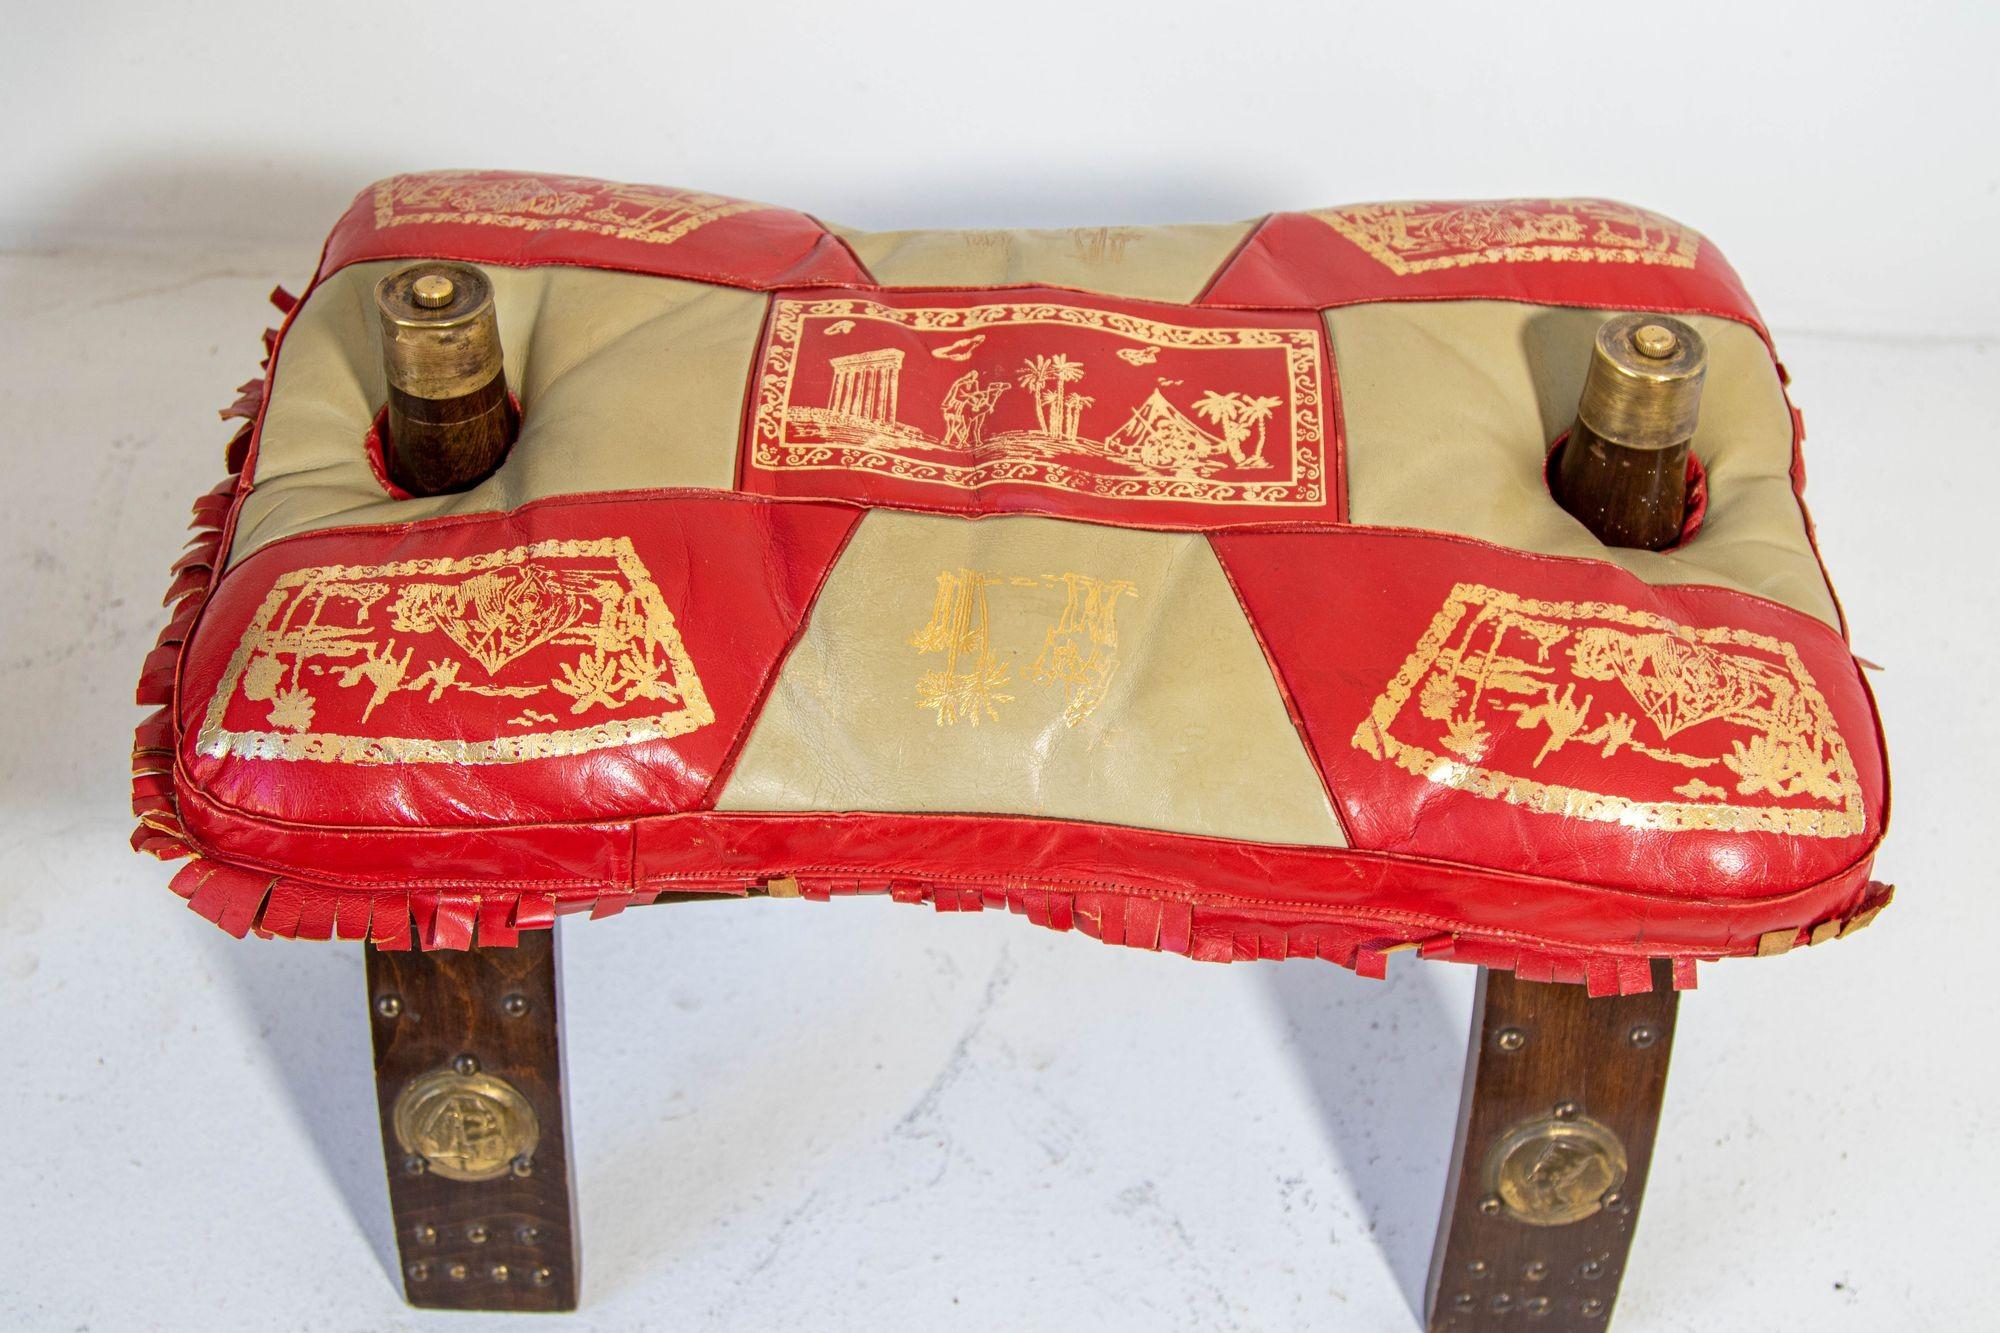 1950s Vintage Egyptian, North Africa camel saddle shape stool.
A middle eastern wood and leather camel saddle wood bench designed with a wooden frame and a red and gold leather cushion seat.
Traditionally used to ride camels in the desert of Africa